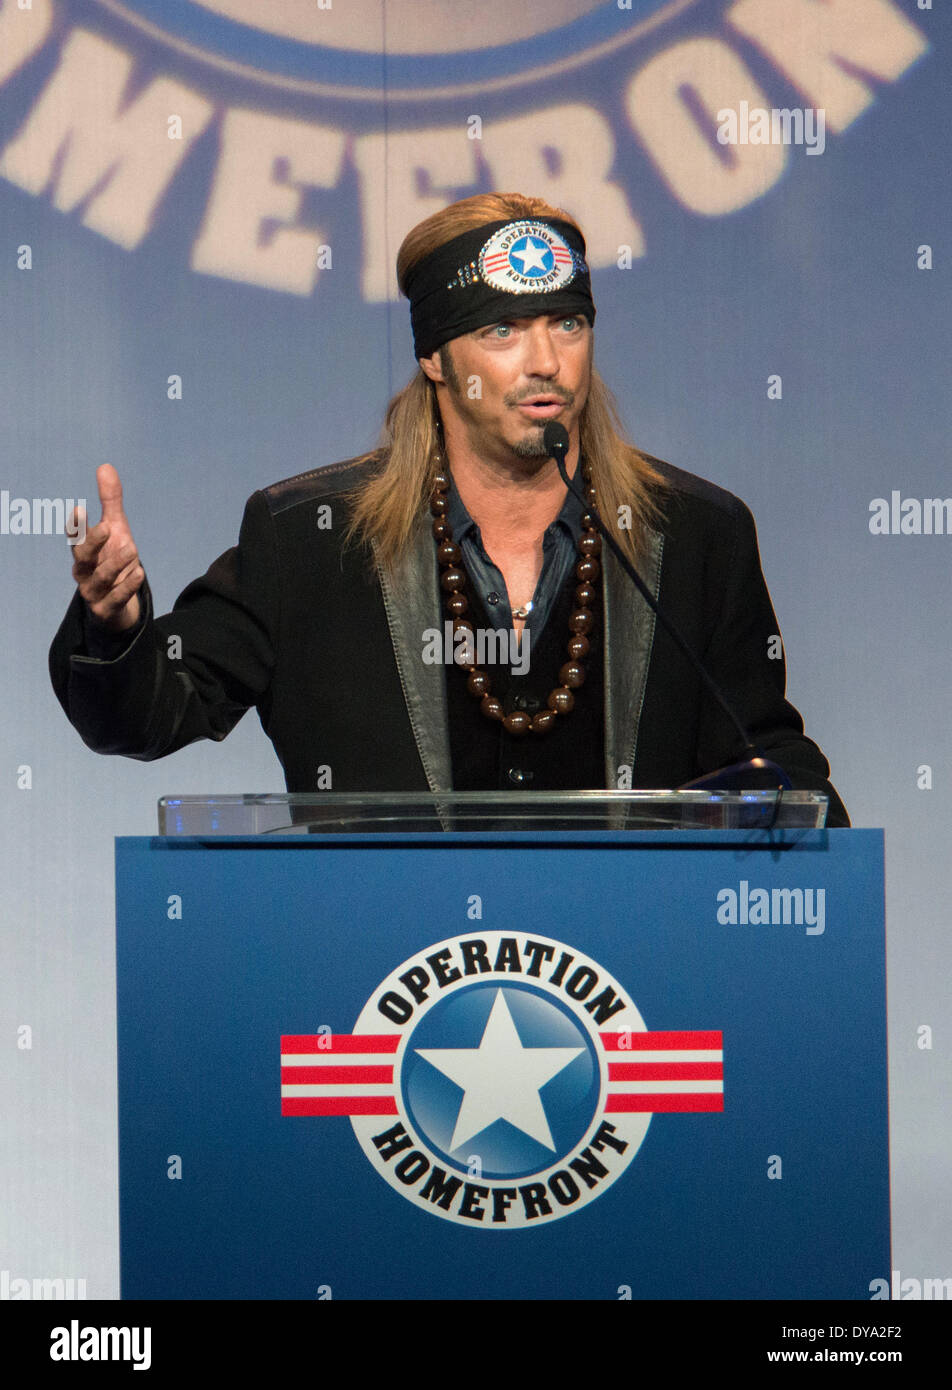 Singer Bret Michaels speaks during the Operation Homefront 6th Annual Military Child of the Year Awards Dinner at the Crystal Gateway Marriott April 10, 2014 in Arlington, Virginia. The Military Child of the Year Award is presented to the military child from each service who demonstrates resiliency, leadership, and achievement. Stock Photo